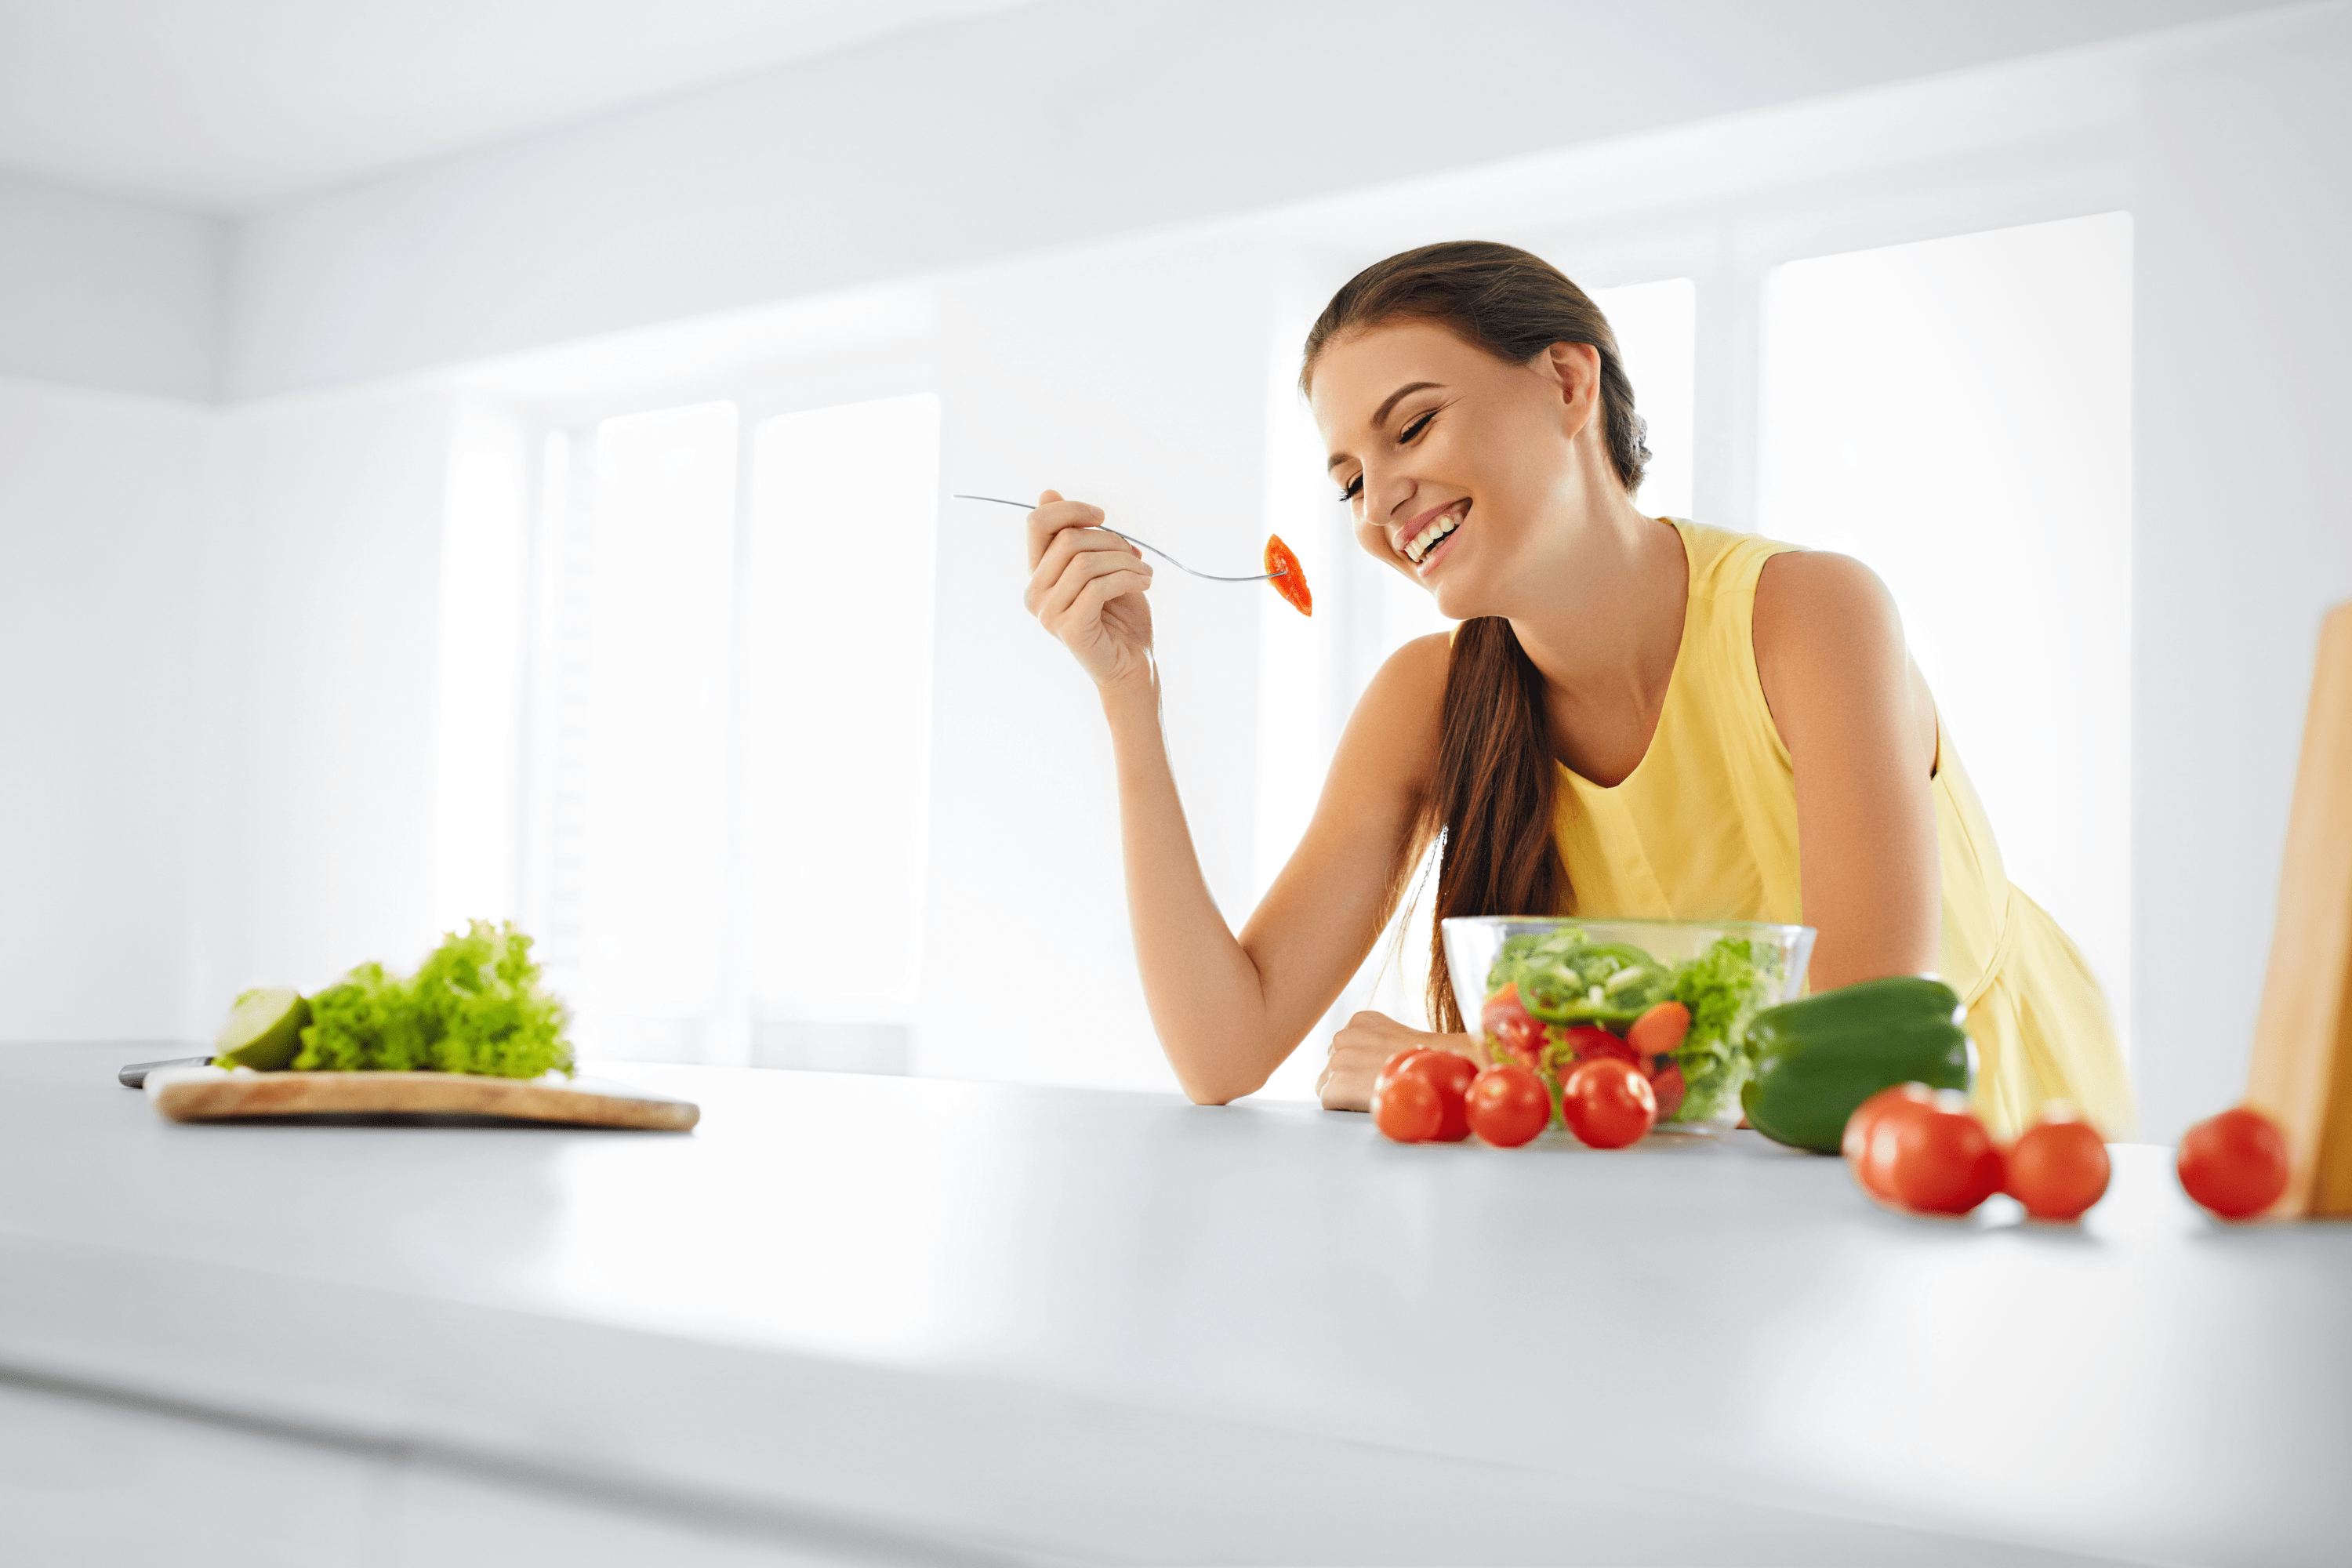 Woman eating veggies in the kitchen: she knows how to get diet back on track and STAY on track!